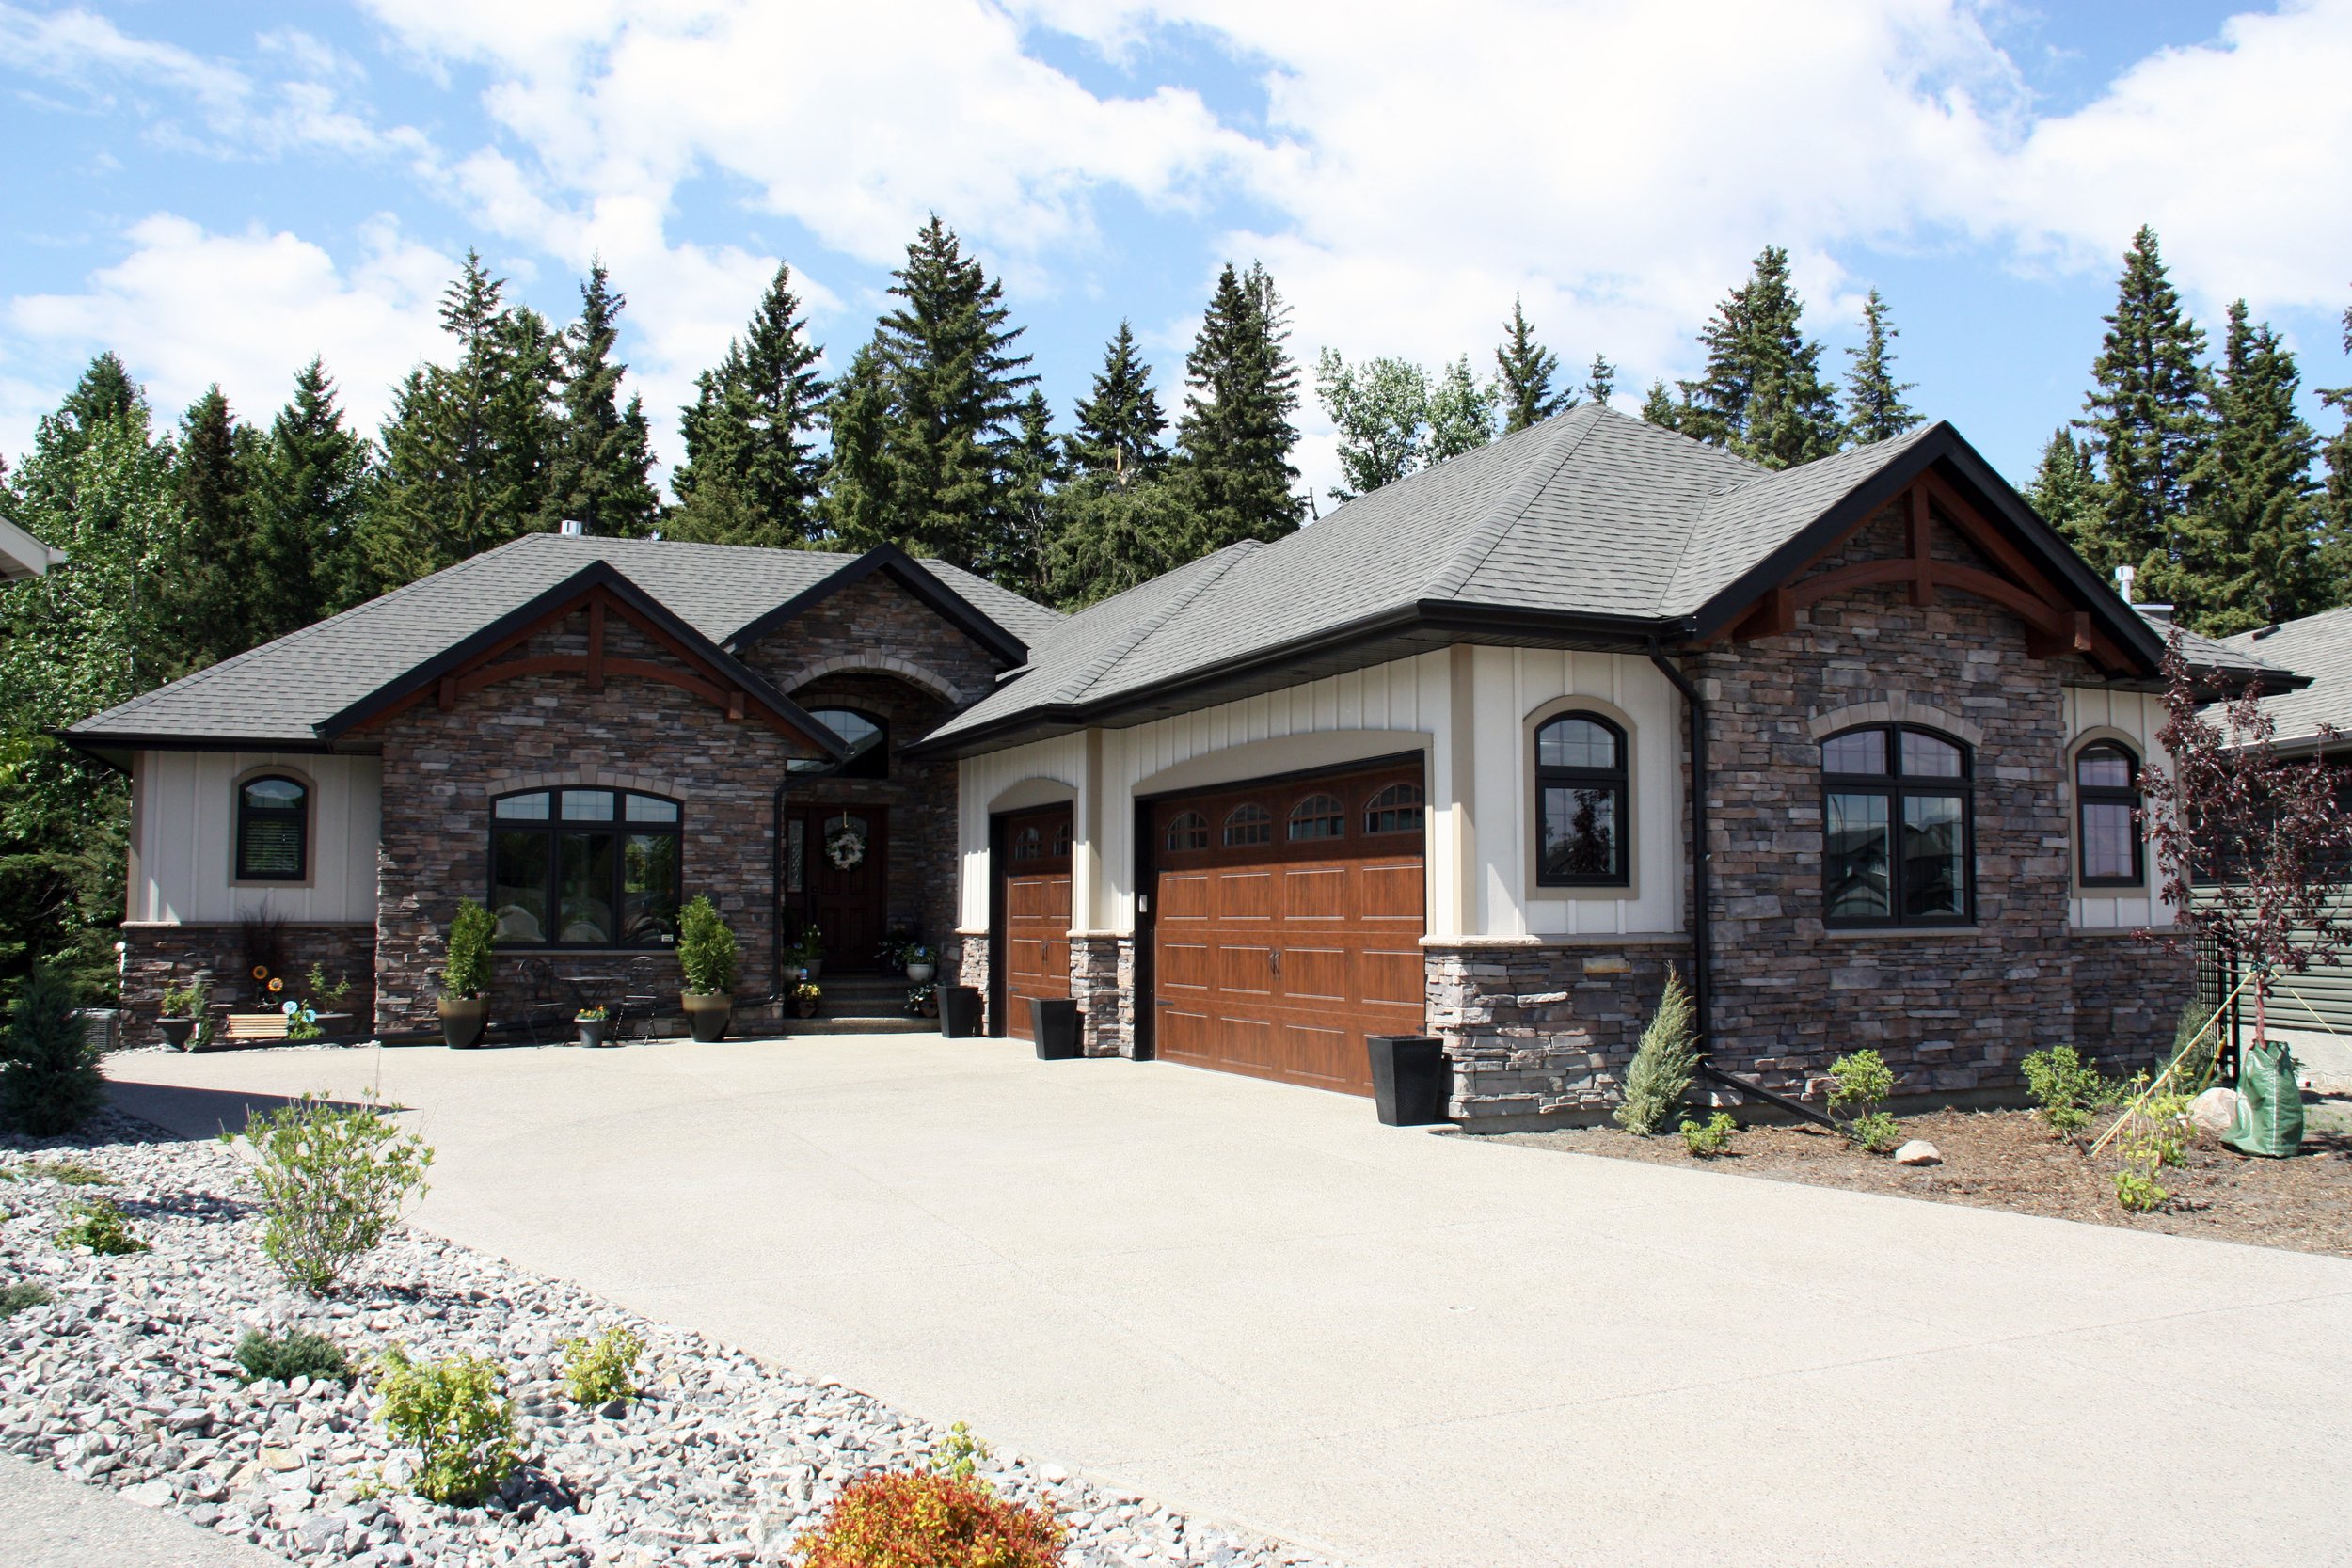   CUSTOM HOMES  Building homes throughout central Alberta since 1976 